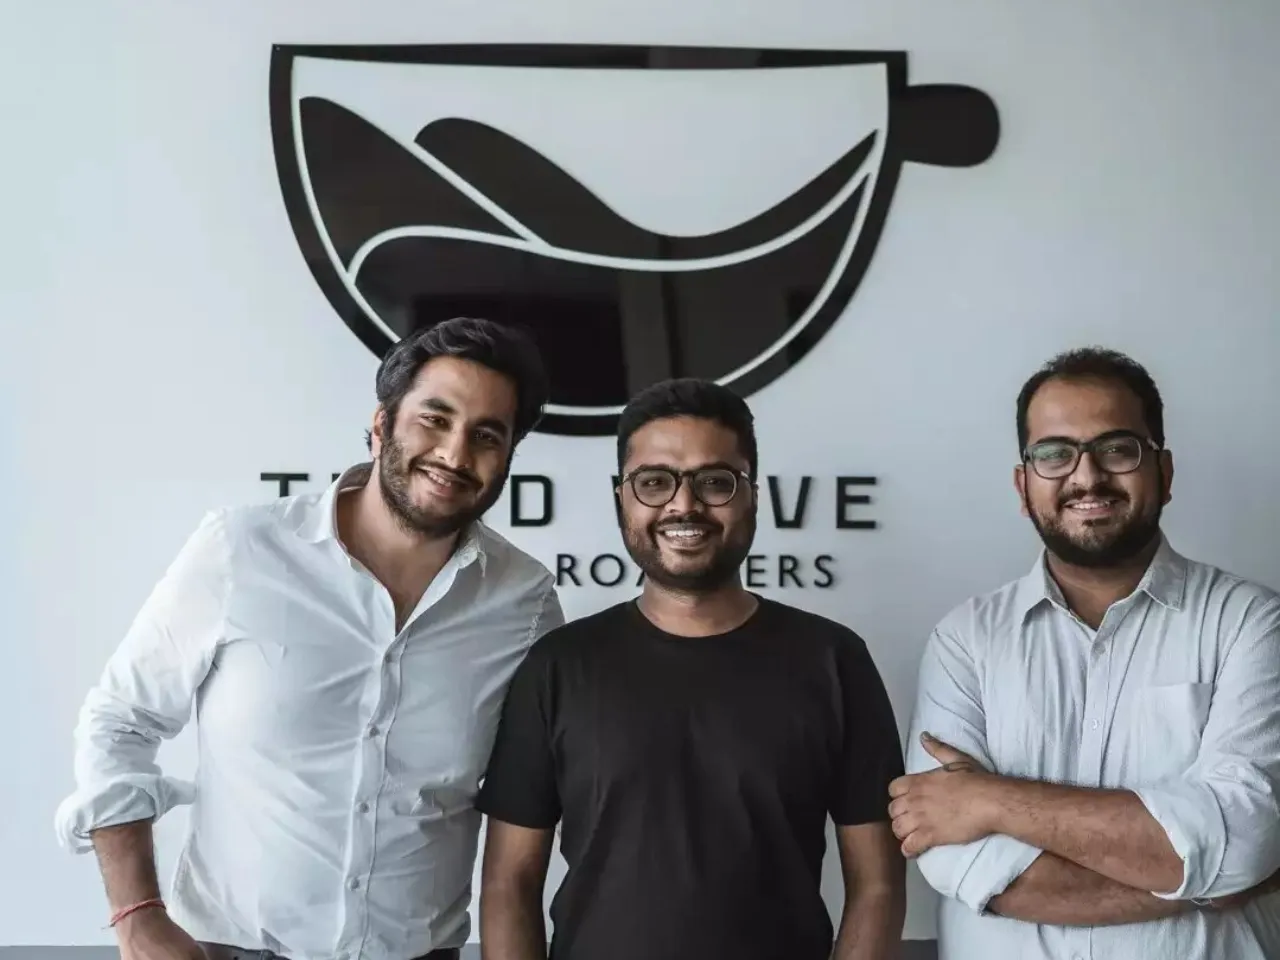 Third Wave Coffee raises $35M led by Creaegis, with participation from existing investors